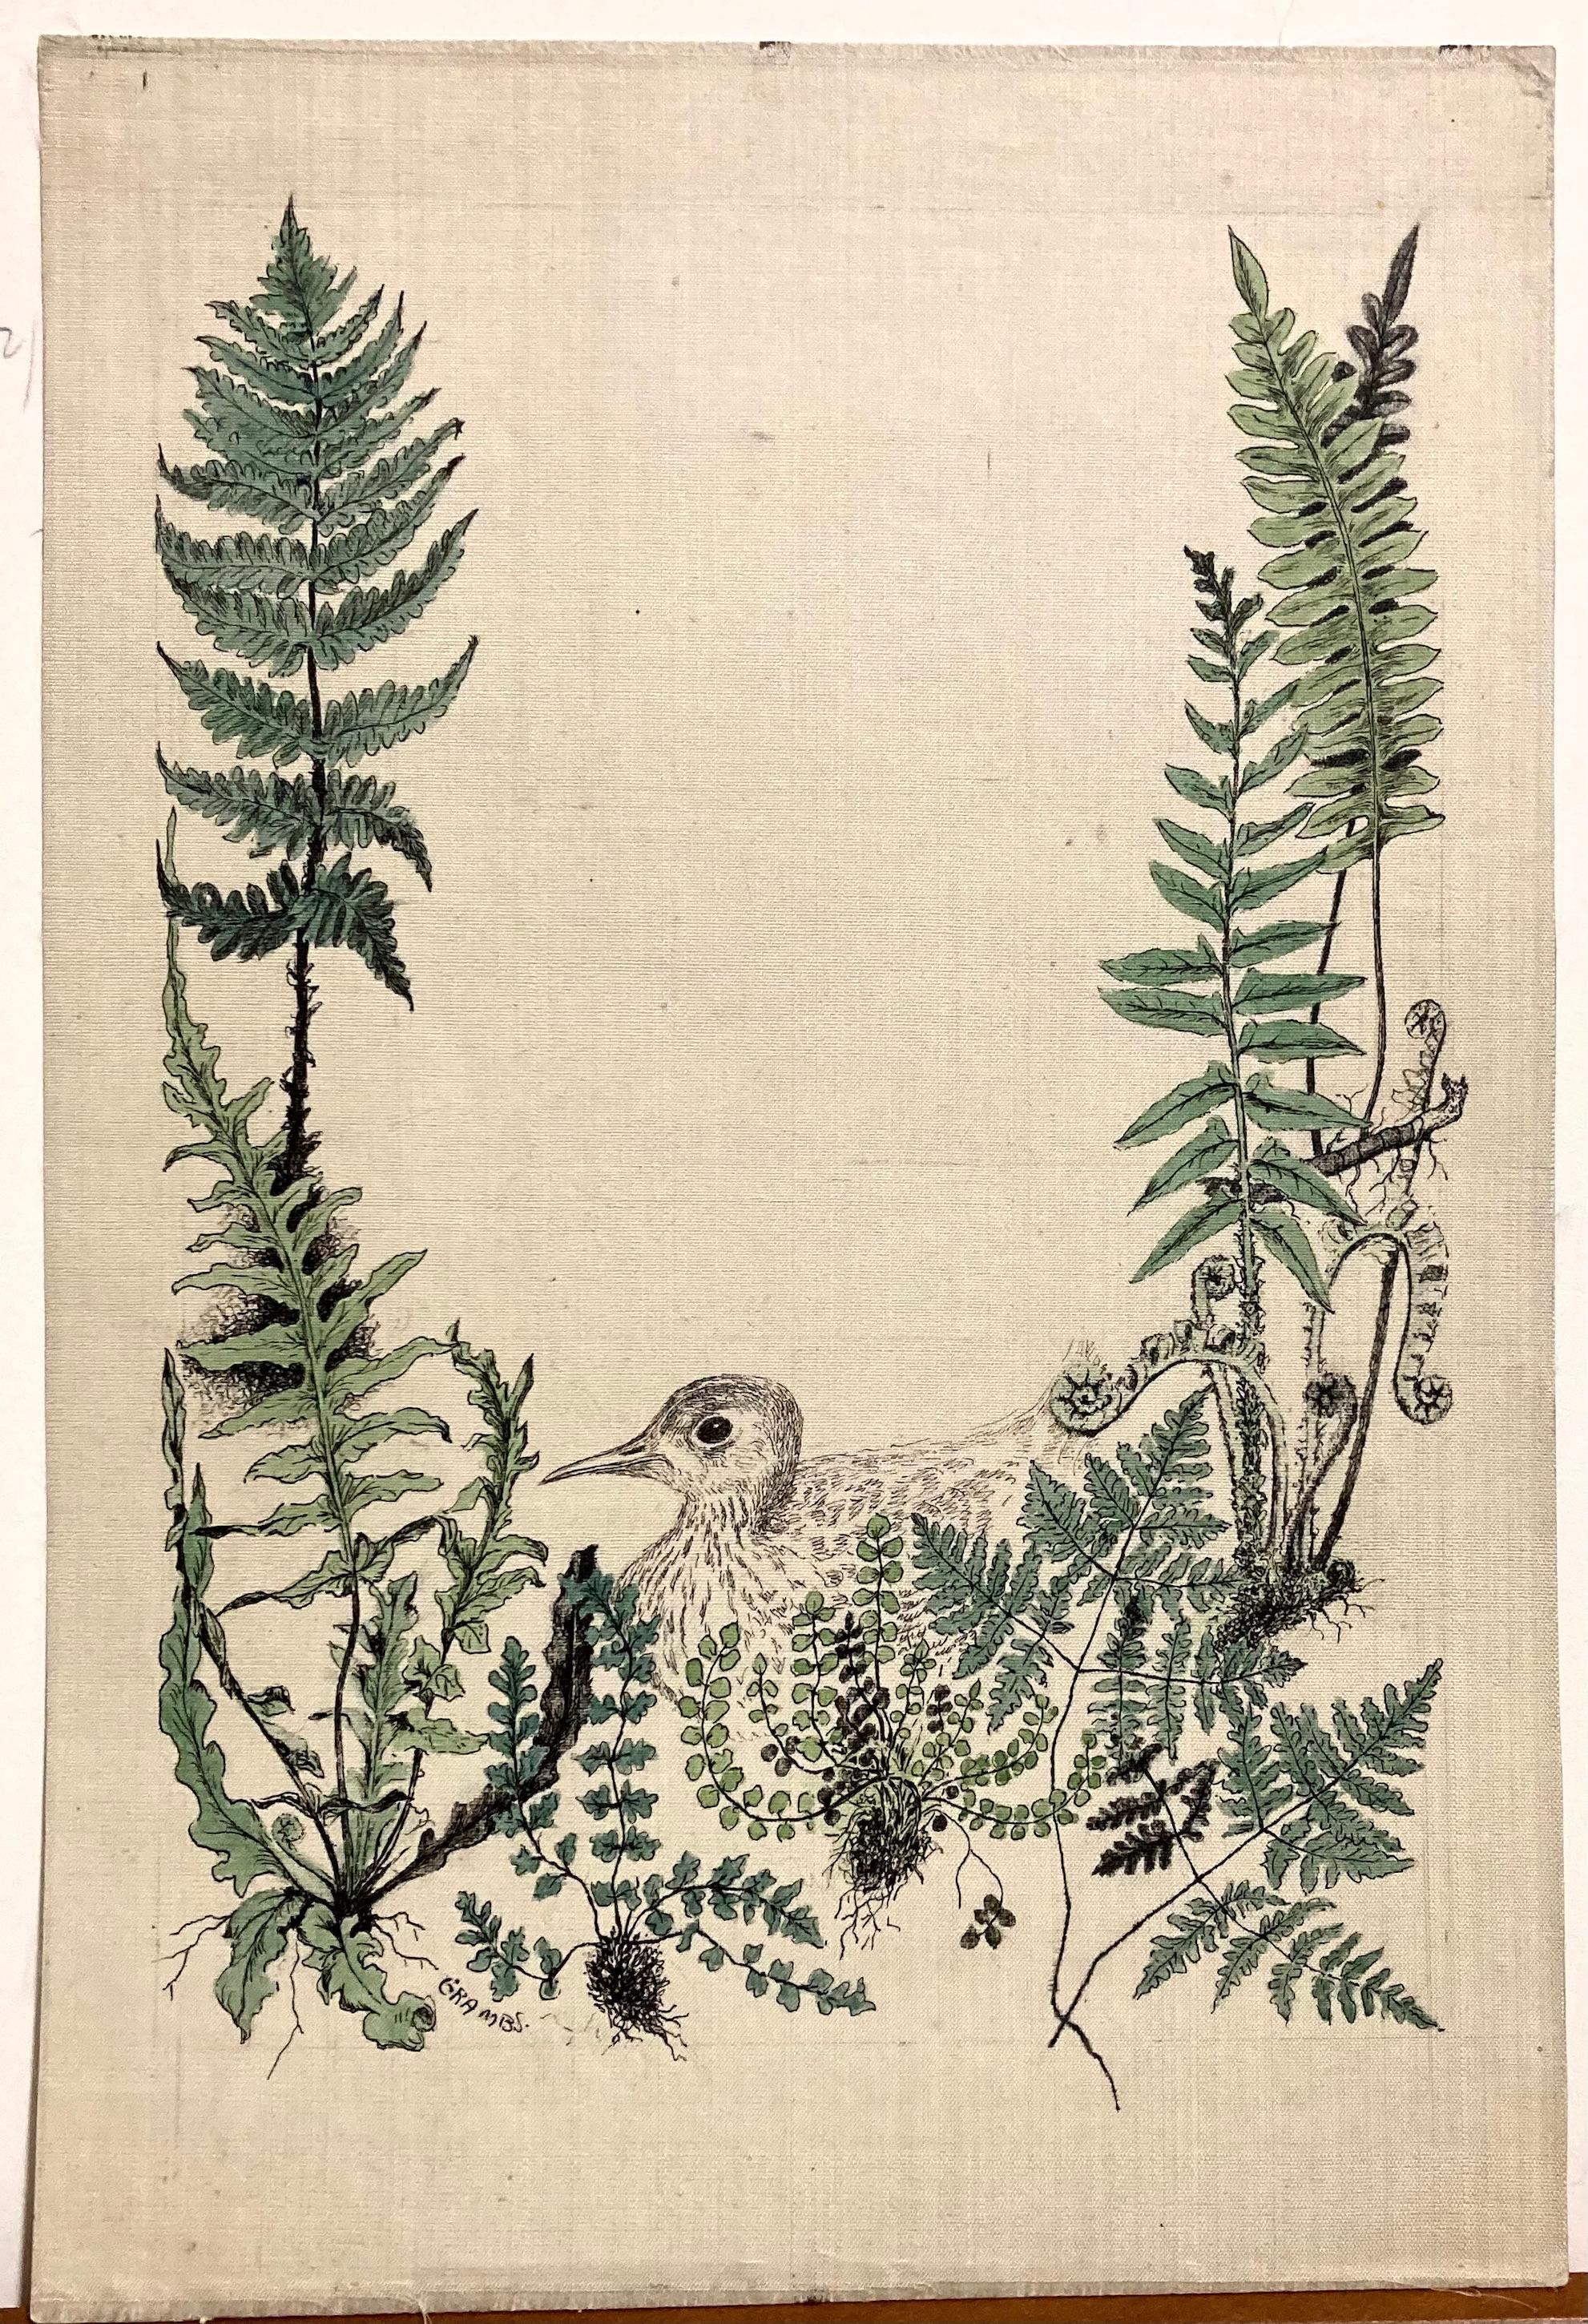 Blanche Grambs, whose career started with the WPA, was an extremely skilled draftsperson.

Her birds are masterful. This charming piece places the yooun bird at the lower part of the foliage, almost hidden in a protective environment. It takes a